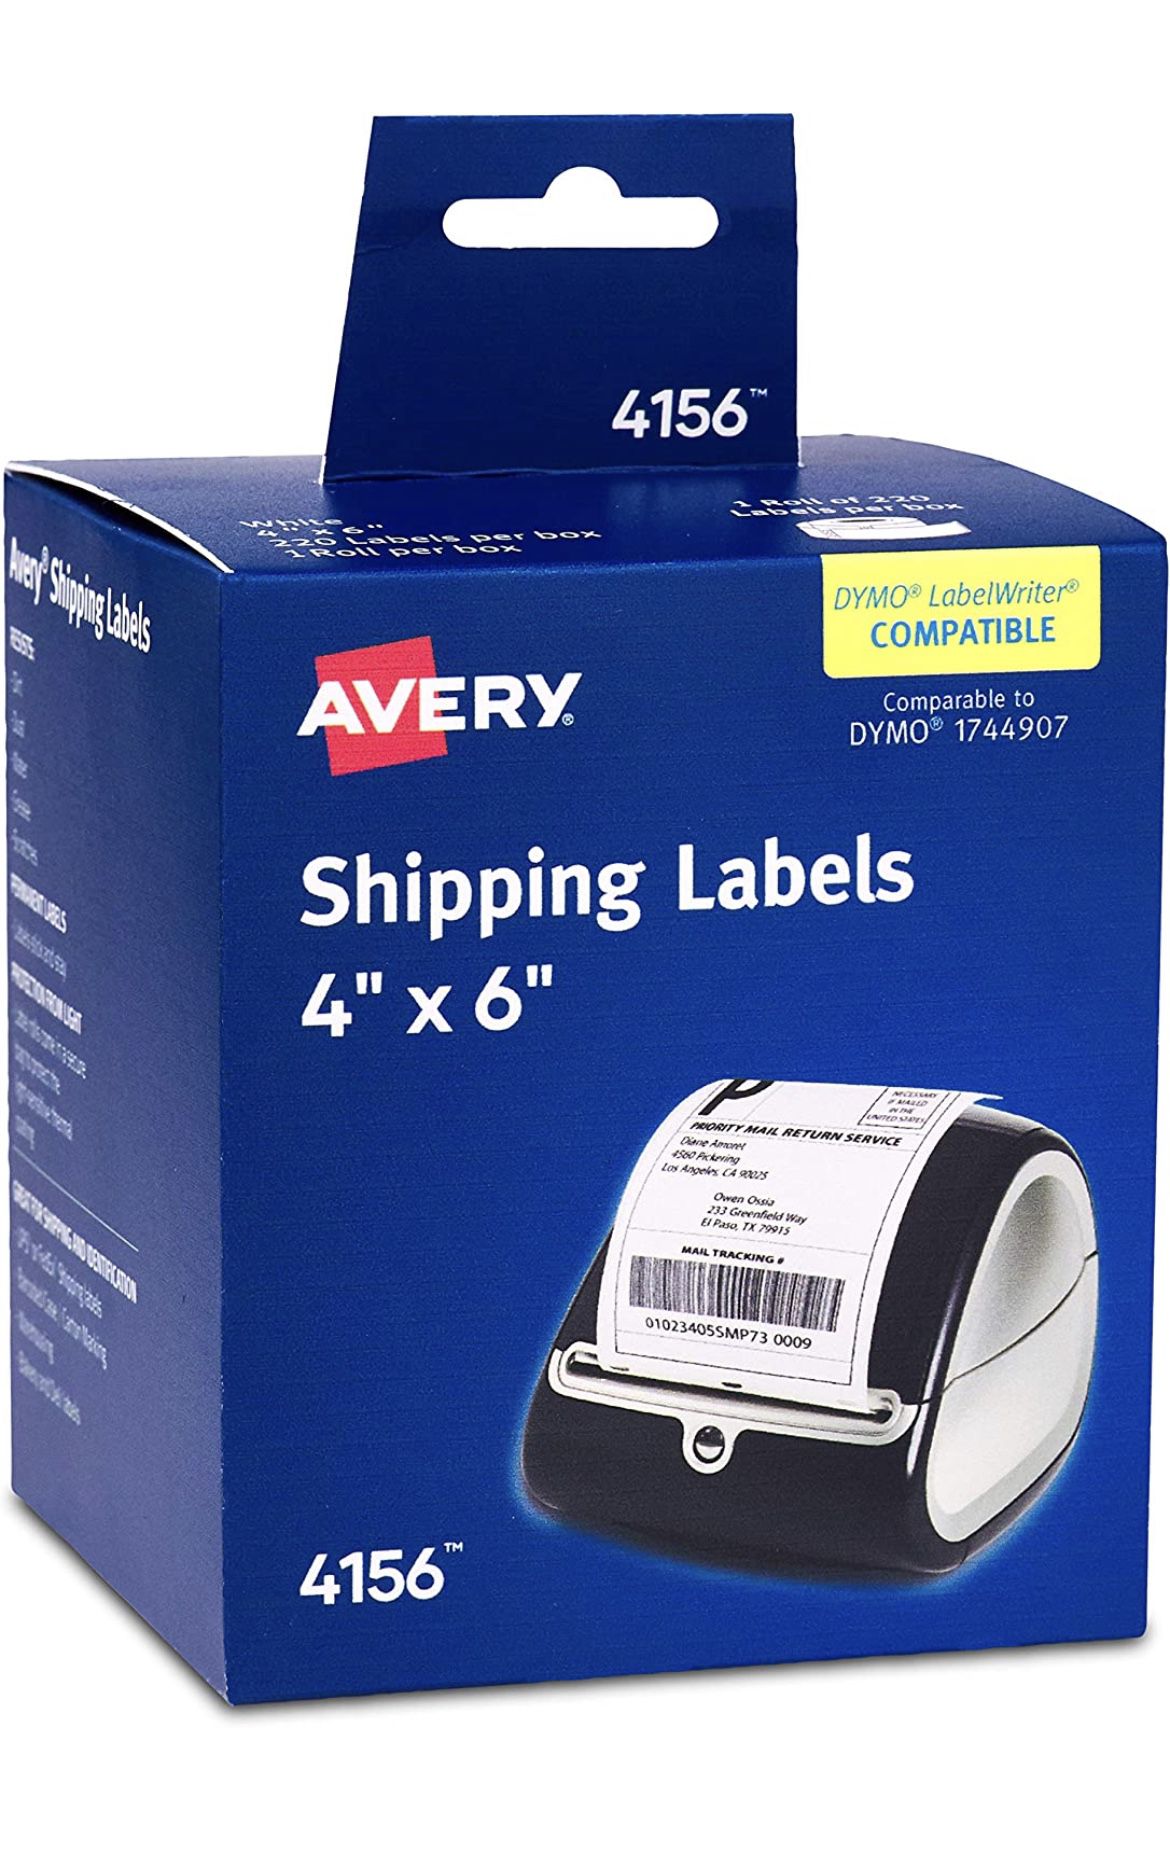 Avery Labels for Dymo Label Printers, Same Size as Dymo 1744907 Labels, 4 x 6, Roll of 220 Labels (4156) , White